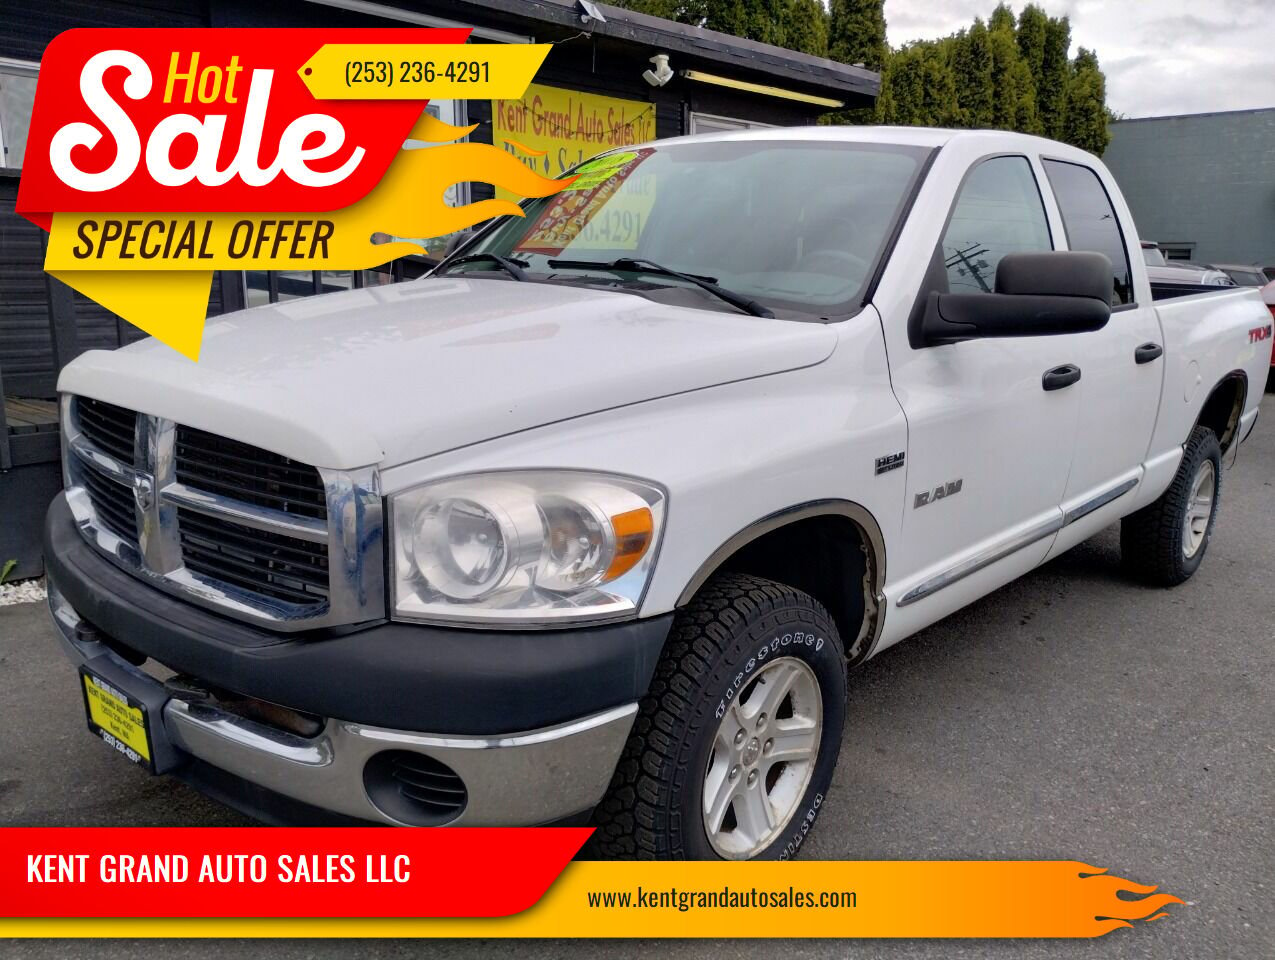 Dodge Ram For Sale In Lacey, WA - Carsforsale.com®